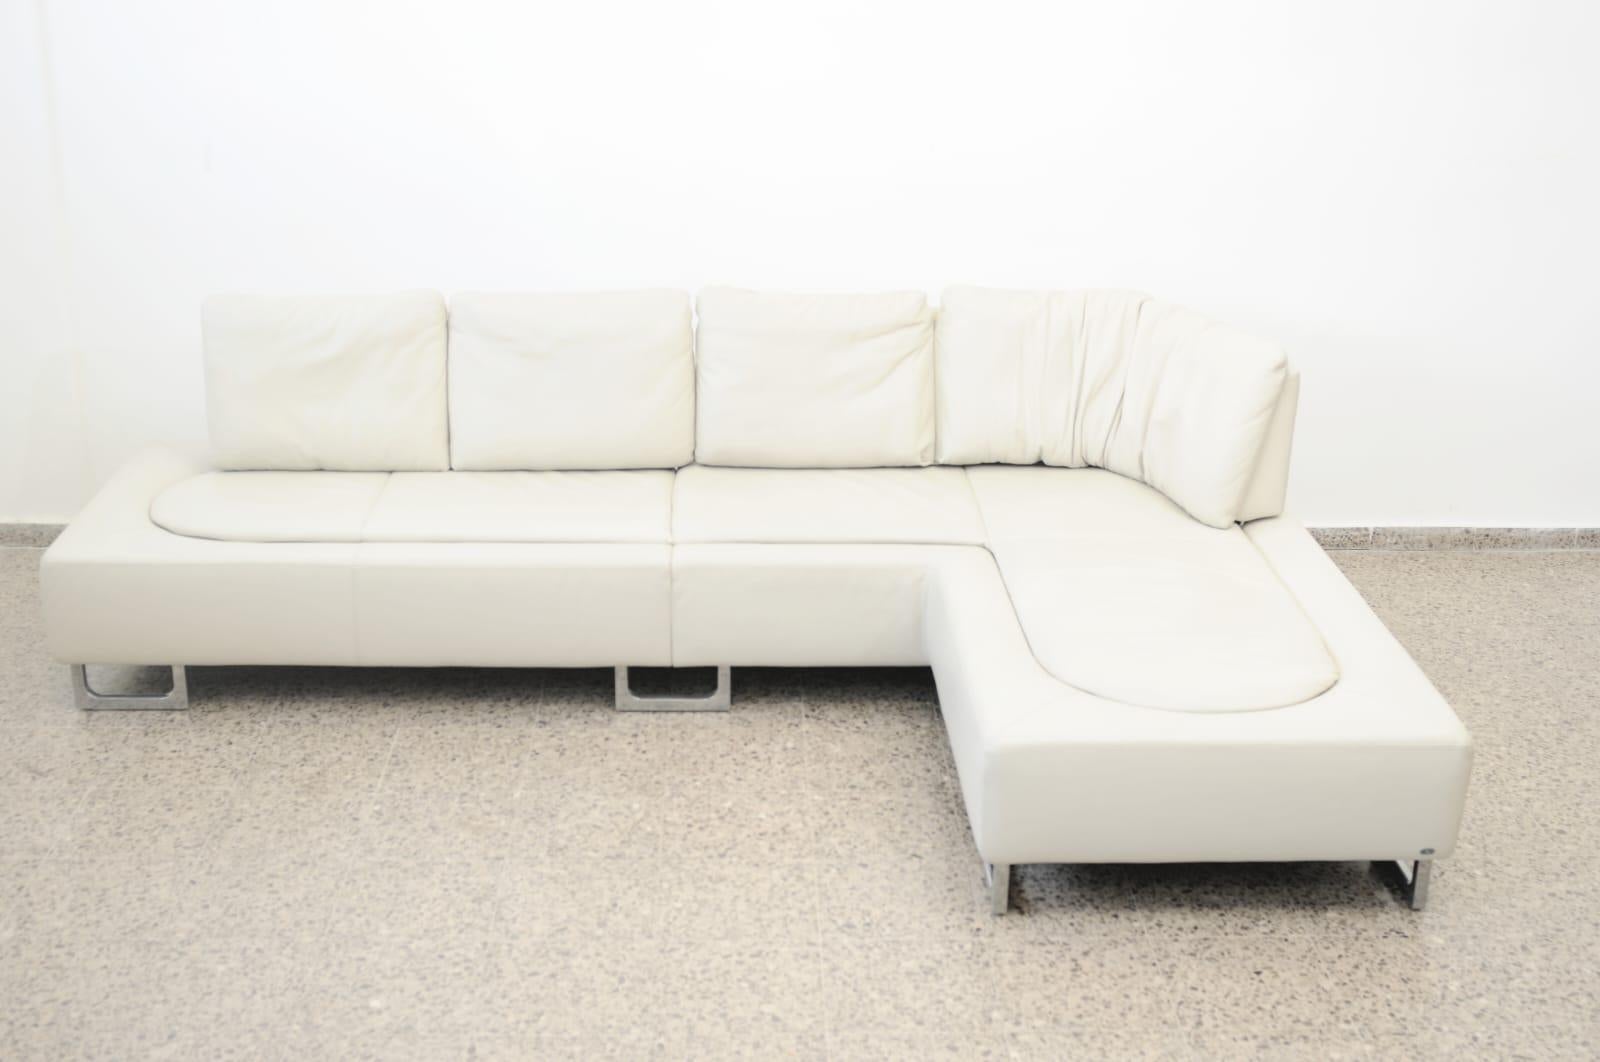 Two (2) Beautiful Contemporary circa 2010 design sofas manufactured by the Swiss maker de Sede
Models DS-165, with the selected leather configuration in Pearl color ref 2414.
Of excellent quality, it has the particularity that the backrests slide